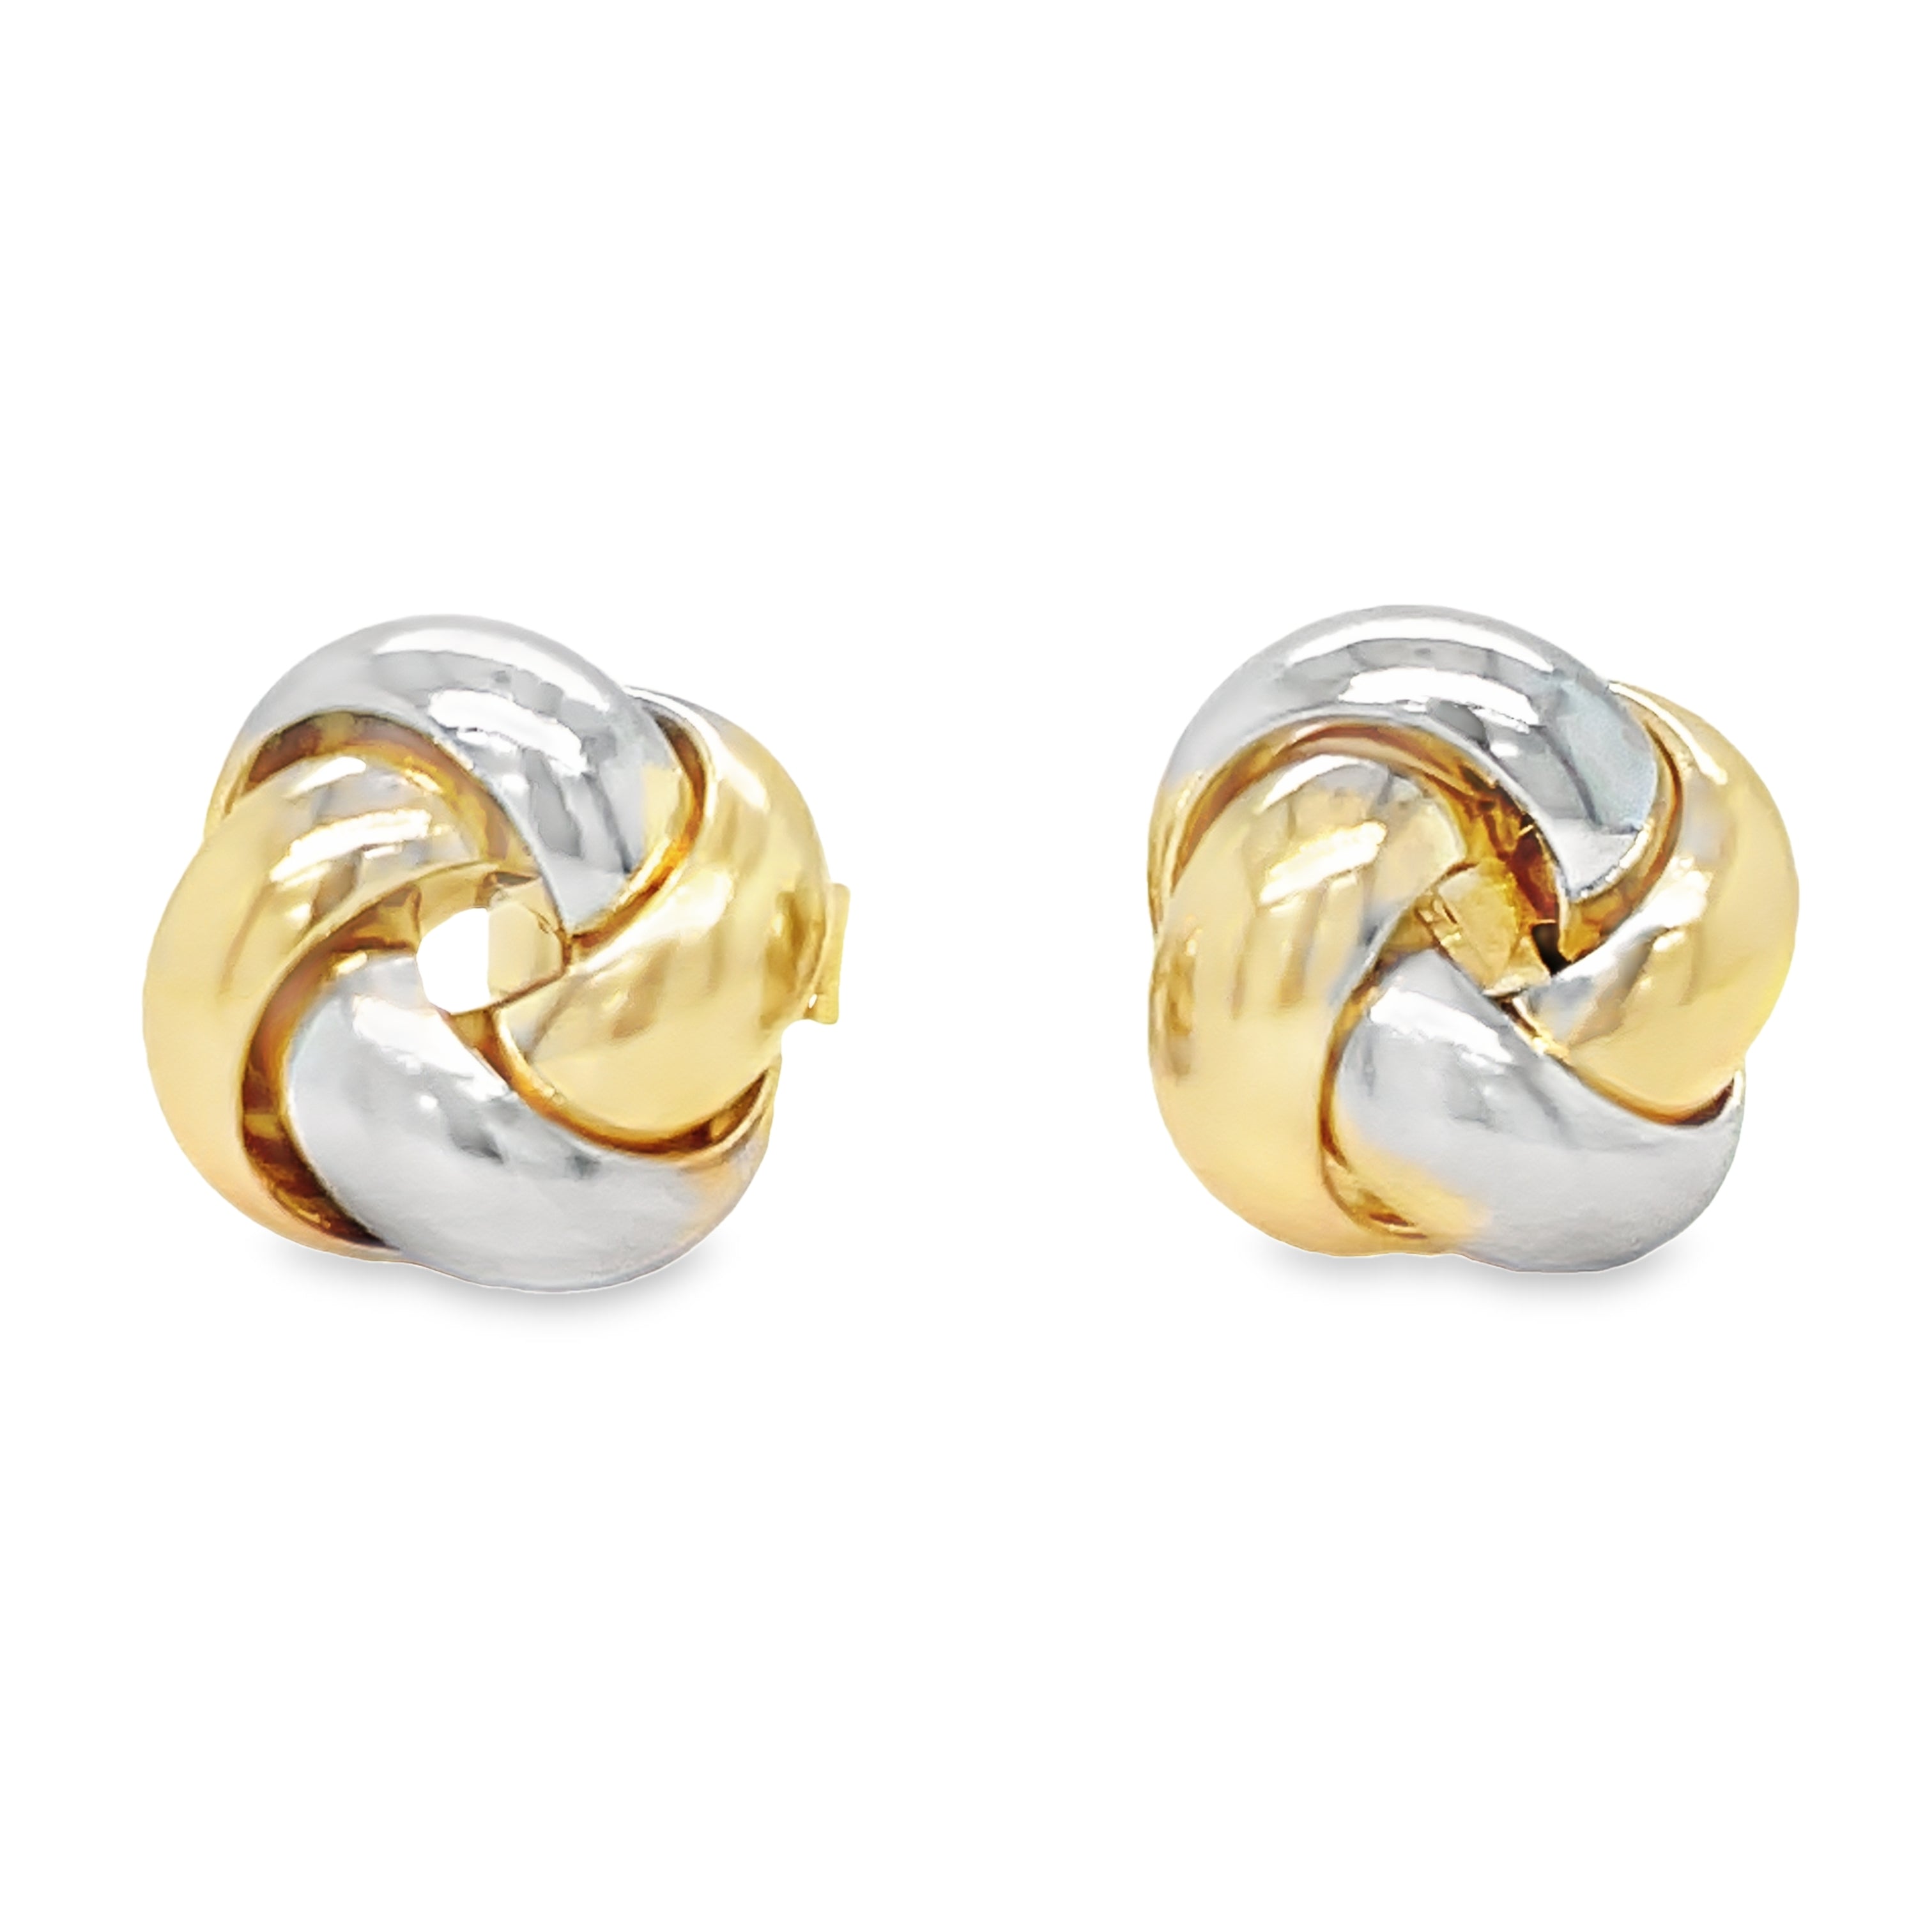 These 14k two tone gold earrings are 10.50 mm and exquisitely crafted into a twist love knot. Highlight your unique style with these beautiful earrings - perfect for everyday wear or special occasions. Show your love with a gift that stands the test of time!